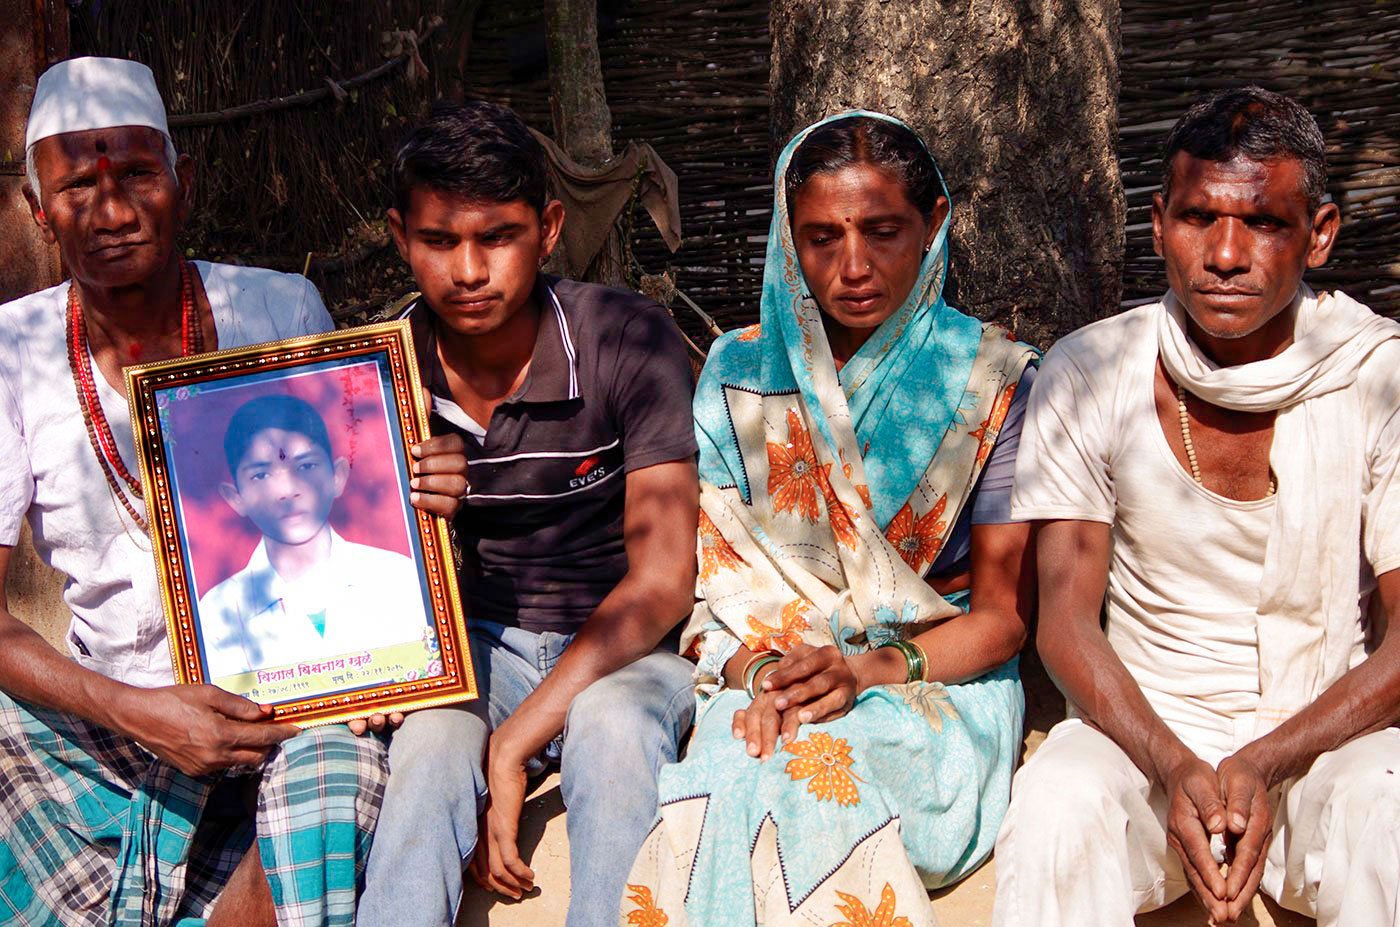 Young Vishal Khule, the son of a famer in Akola’s Dadham village, took his own life in 2015. Seen here are Vishal's father, Vishwanath Khule and his mother Sheela (on the right); elder brother Vaibhav and their neighbour Jankiram Khule with Vishal’s paternal uncle (to the left). Dadham, with a population of 1,500, is among the poorest villages in western Vidarbha, Maharashtra’s cotton and soybean belt, which has been in the news since the mid-1990s for a continuing spell of farmers’ suicides. The region is reeling under successive years of drought and an agrarian crisis that has worsened